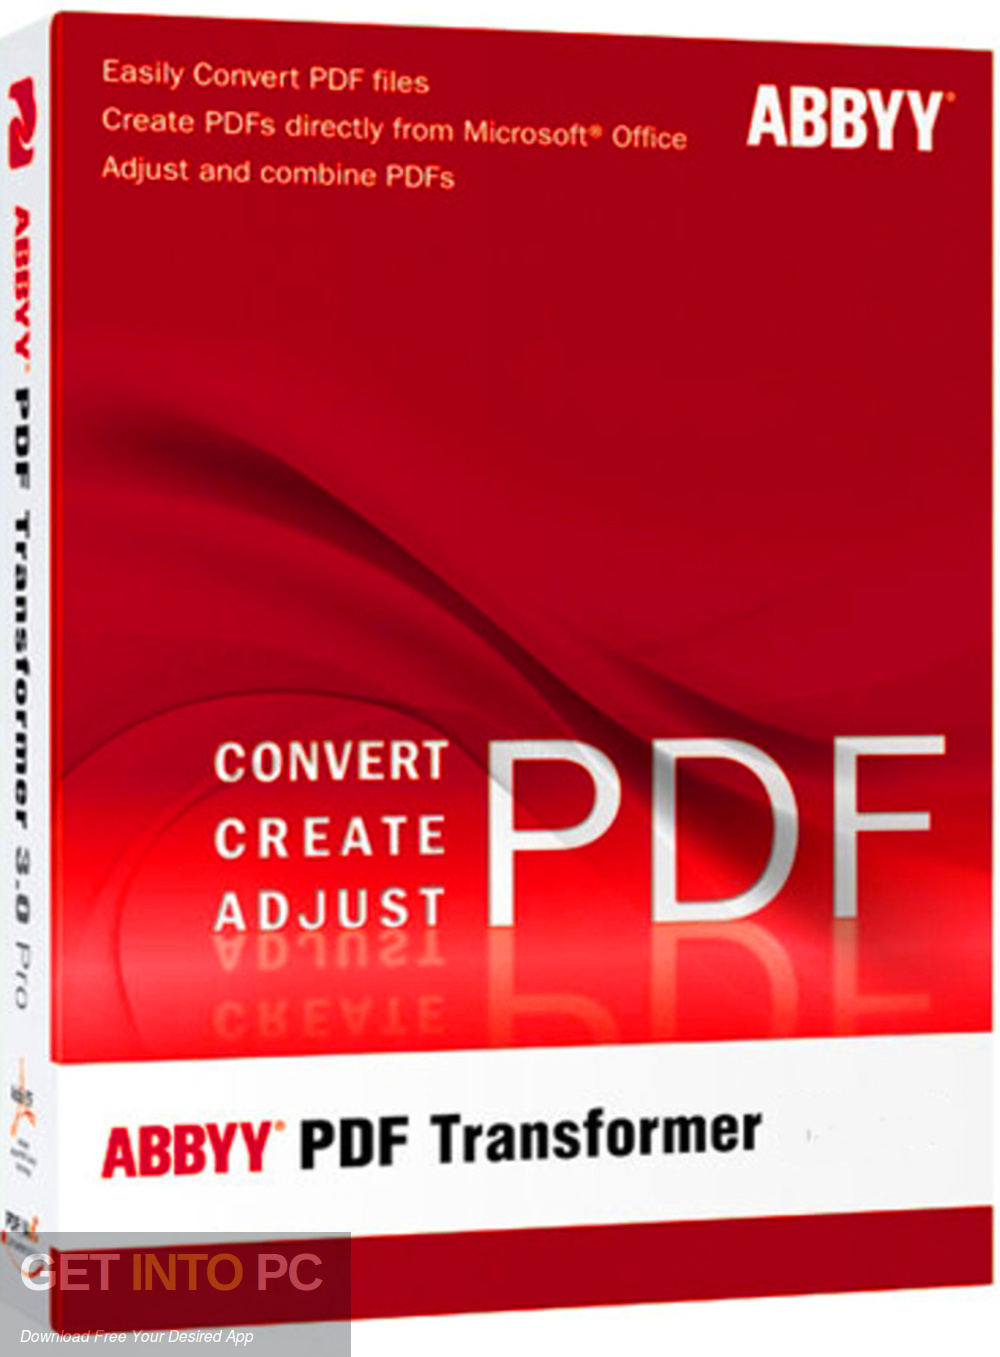 abbyy pdf transformer free download with crack